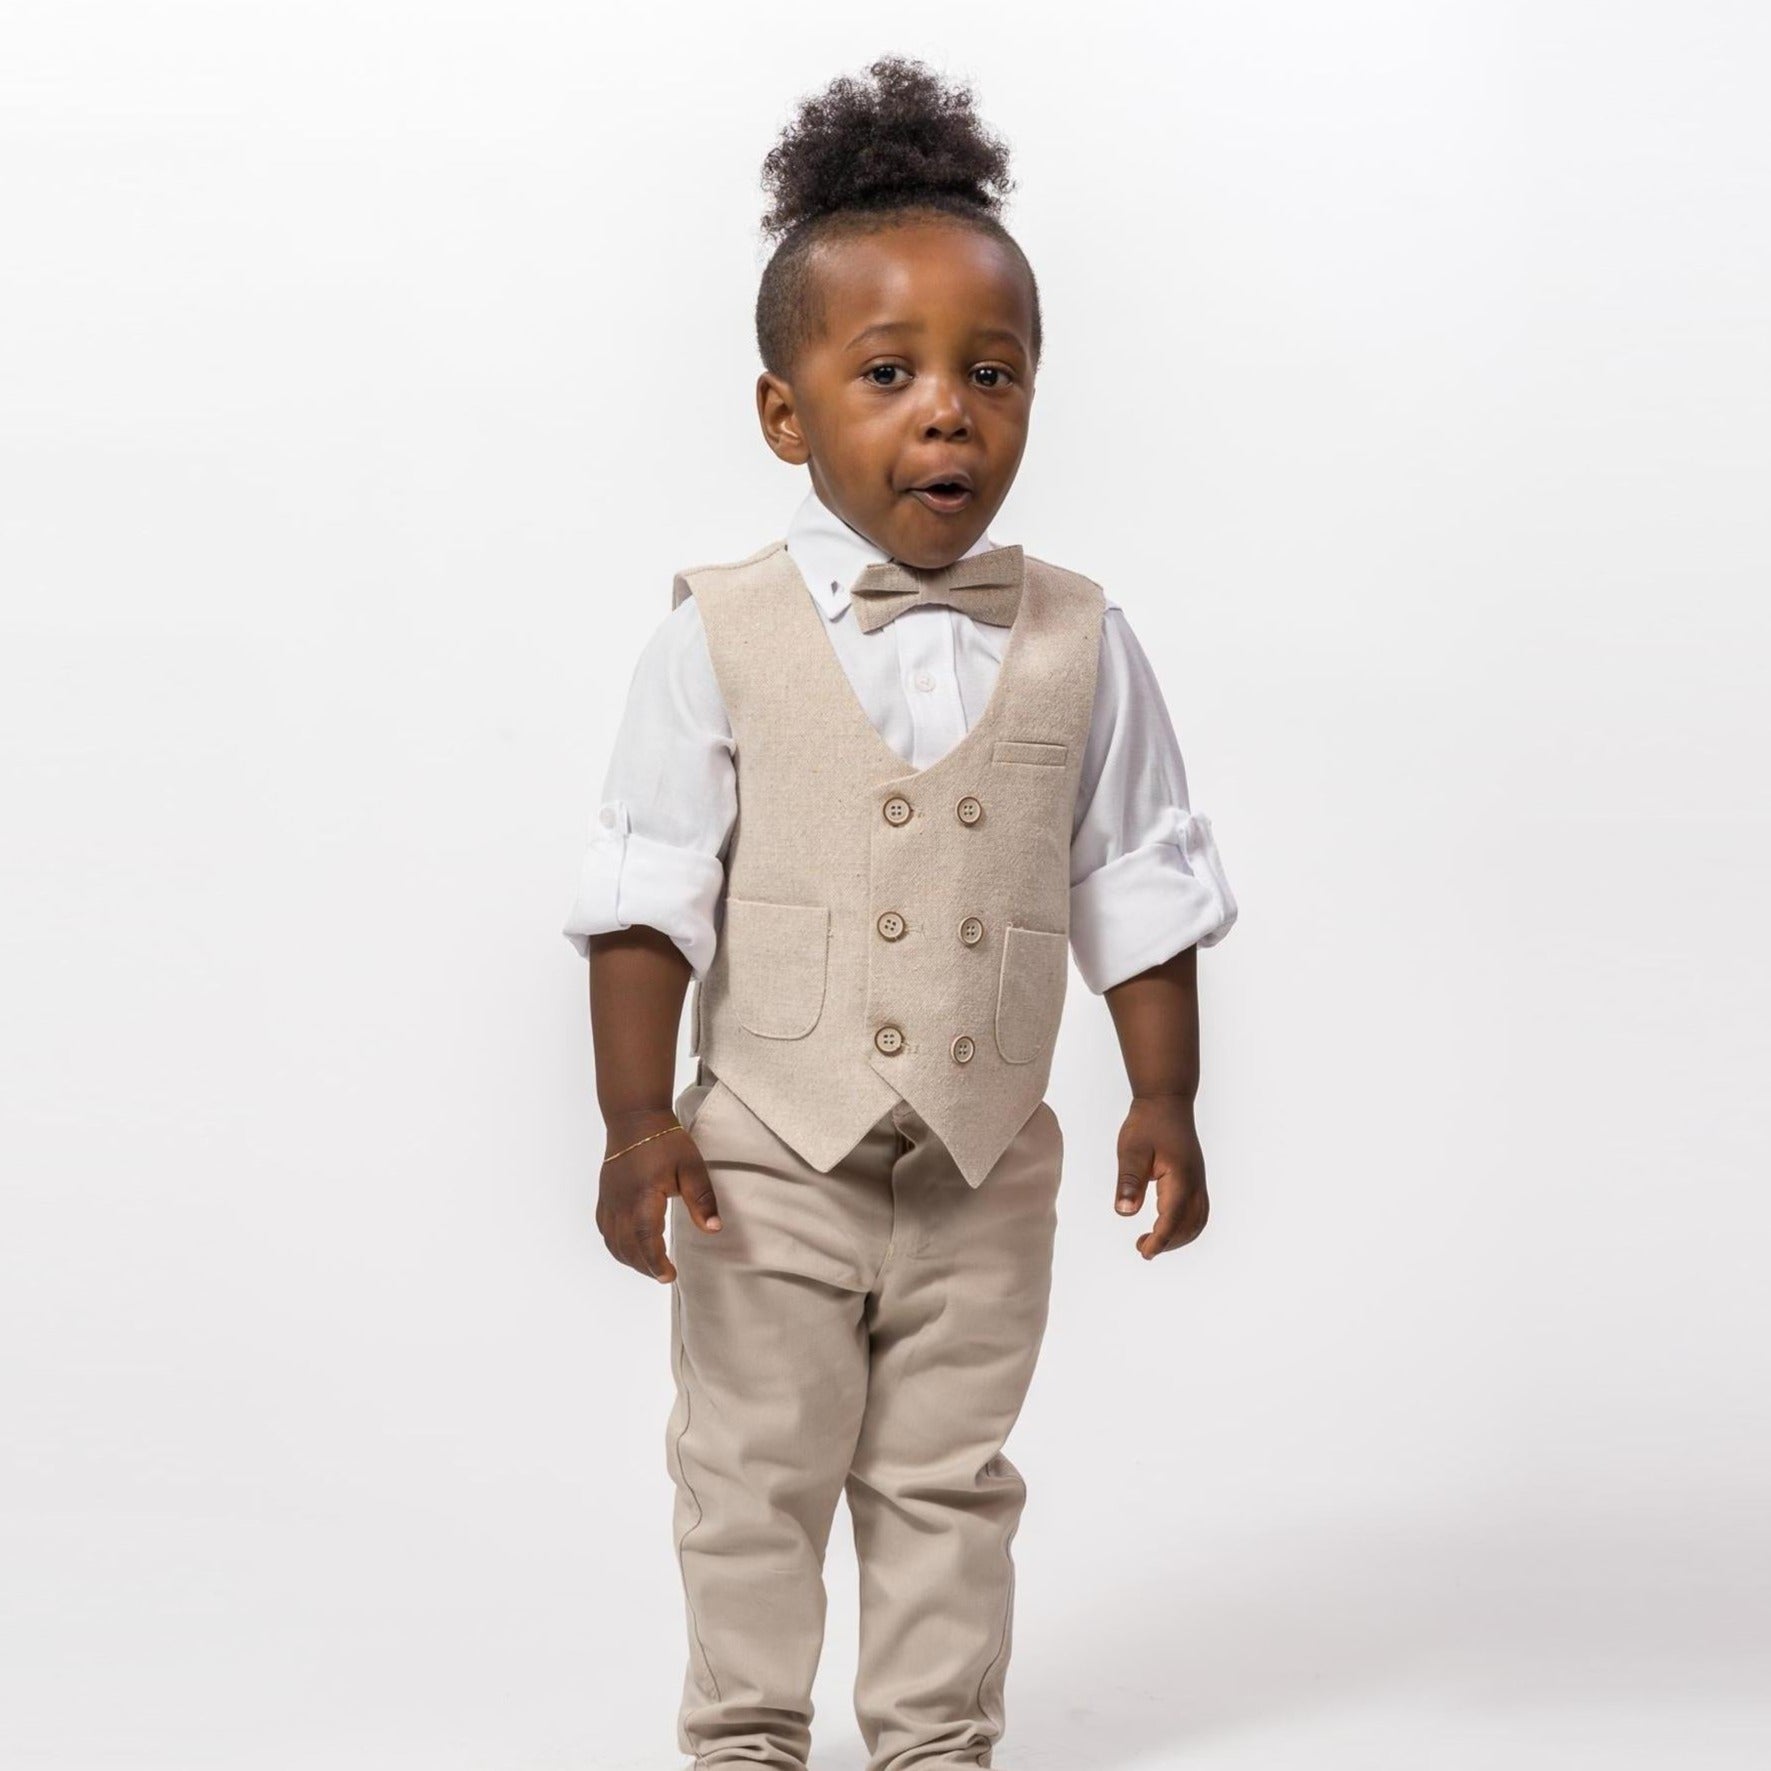 Classic Charlie Formal Boys Suit